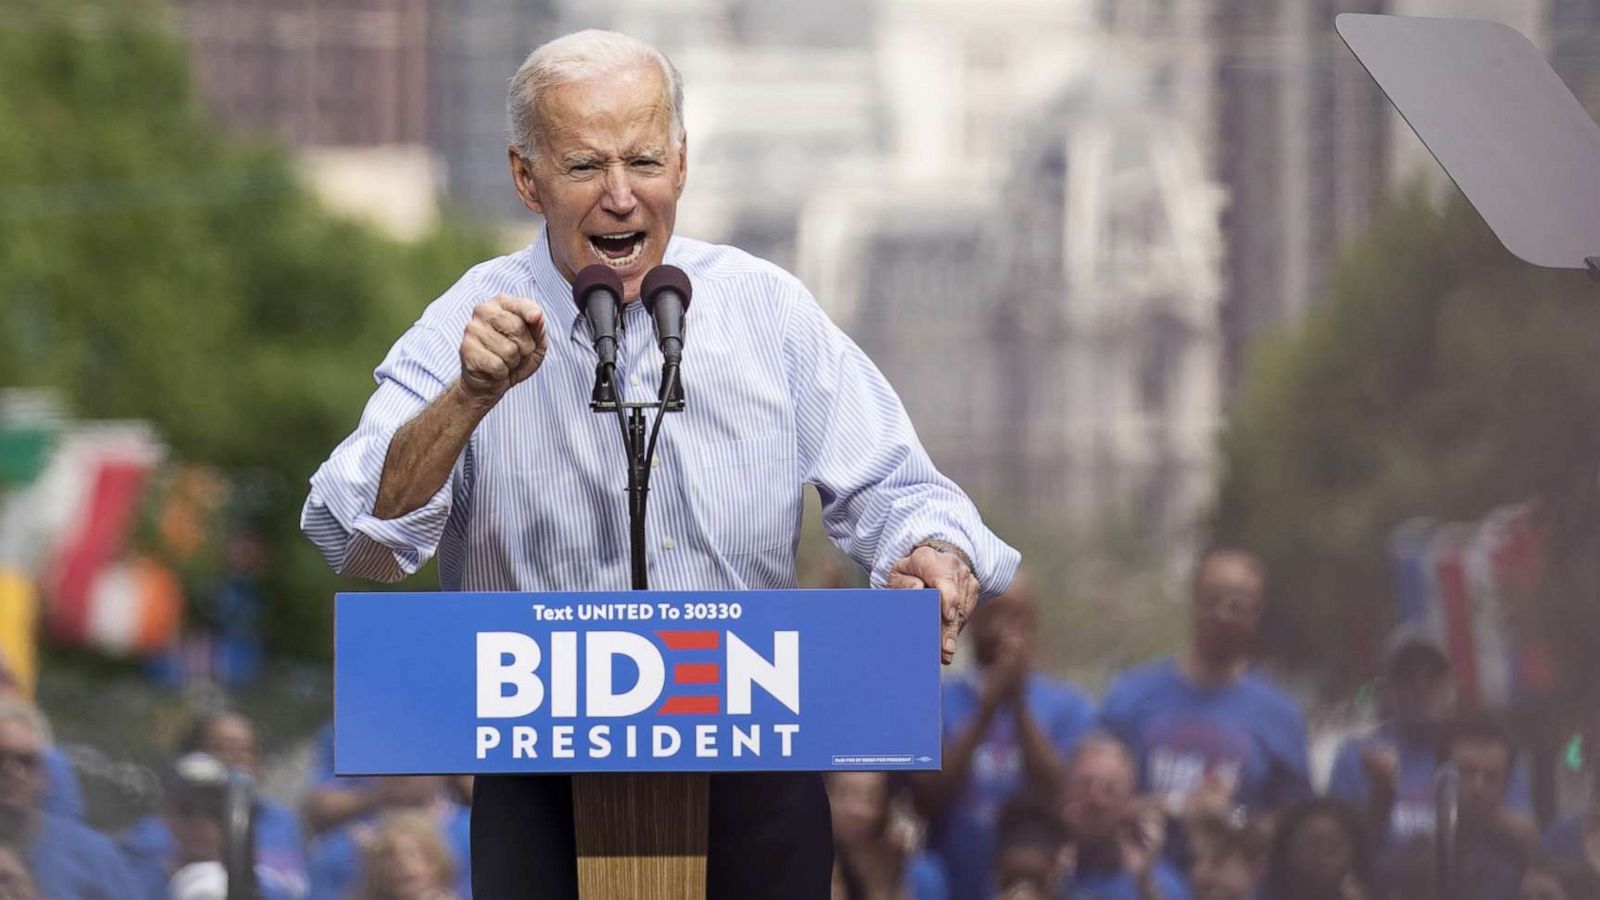 Joe Biden gives pitch on uniting the country in Philadelphia